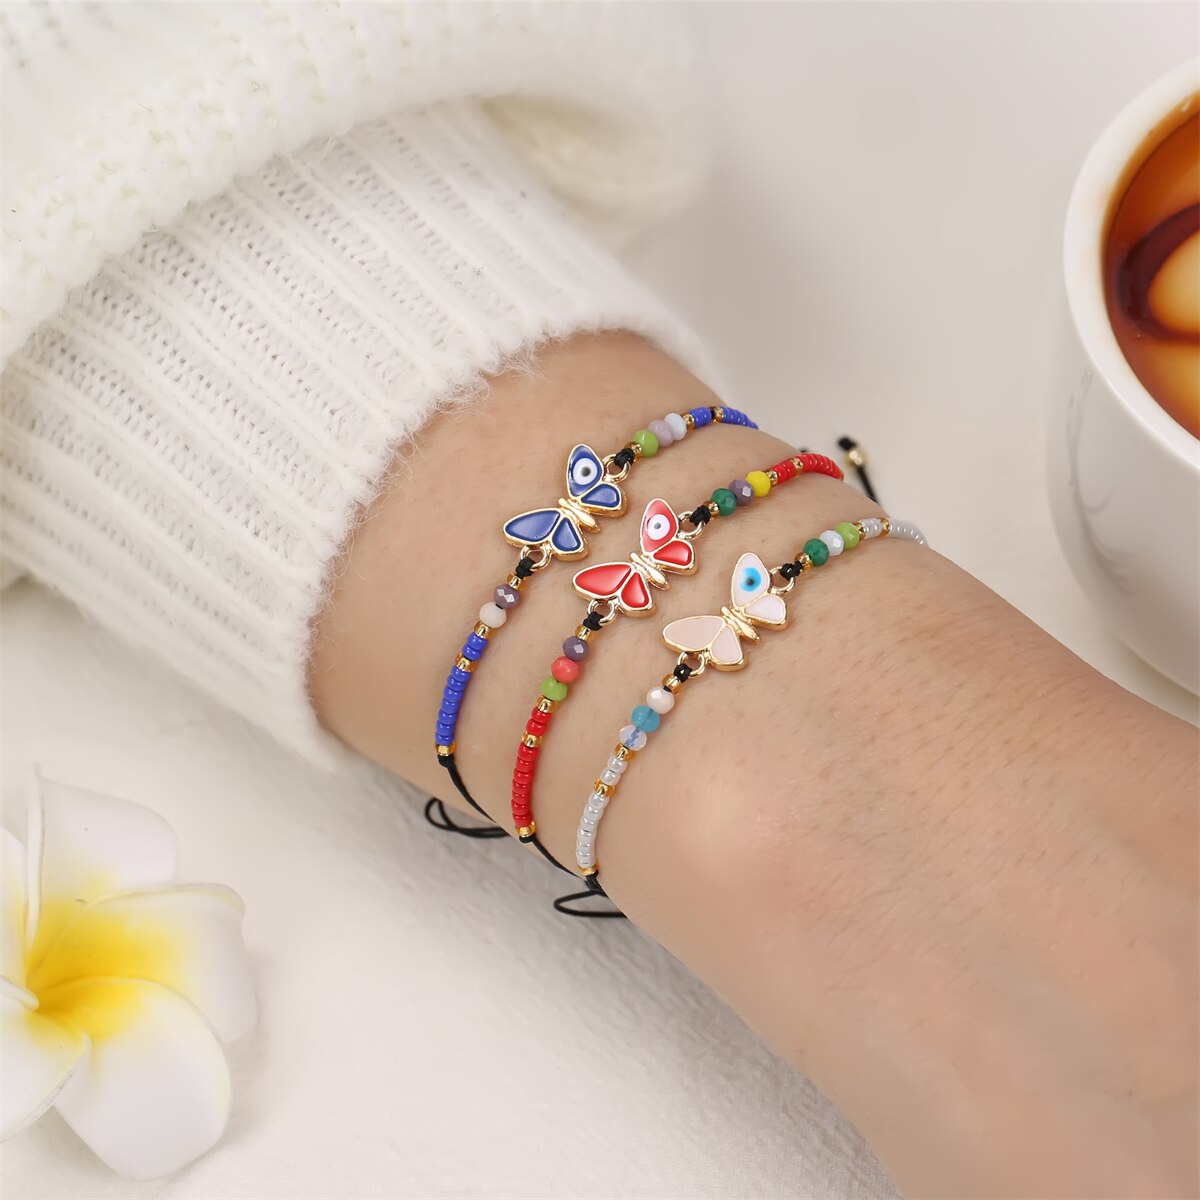 12pcs/lot Women Colorful Crystal Beads Butterfly Pendant Charms Bracelets Child Braided Adjustable Rope Chain Anklets Jewelry